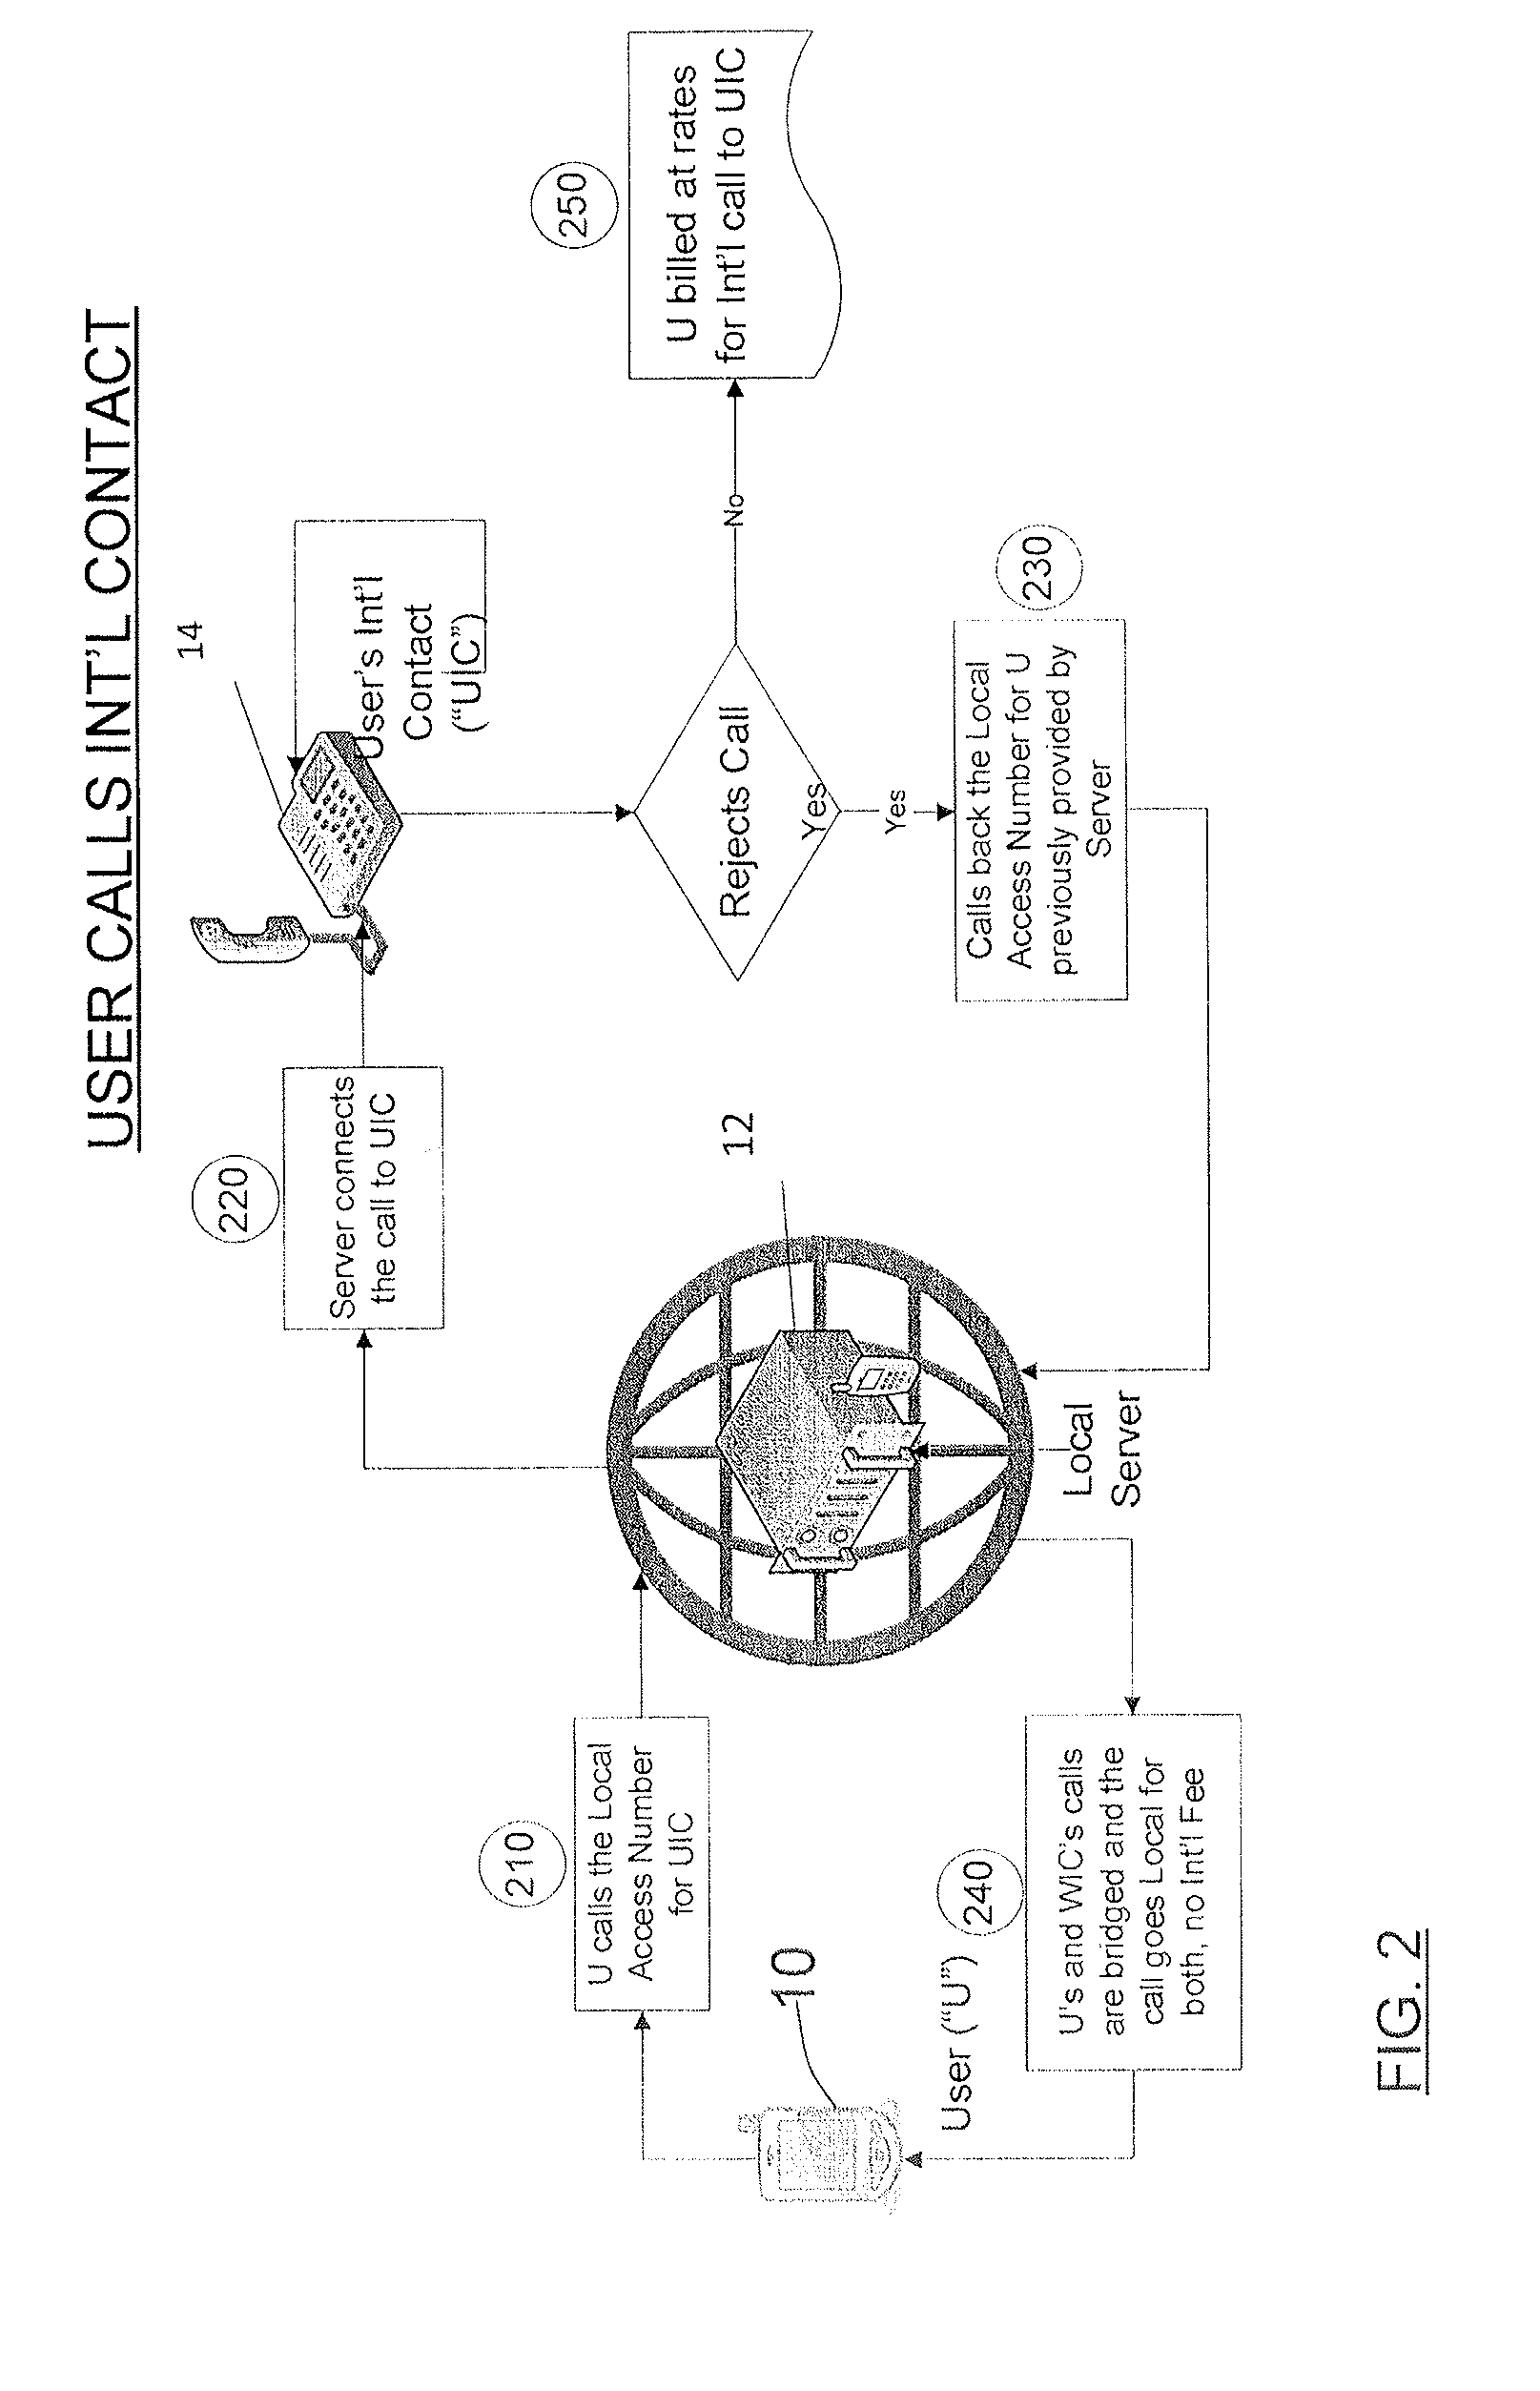 Method and apparatus for establishing internetwork communication between telecommunication devices